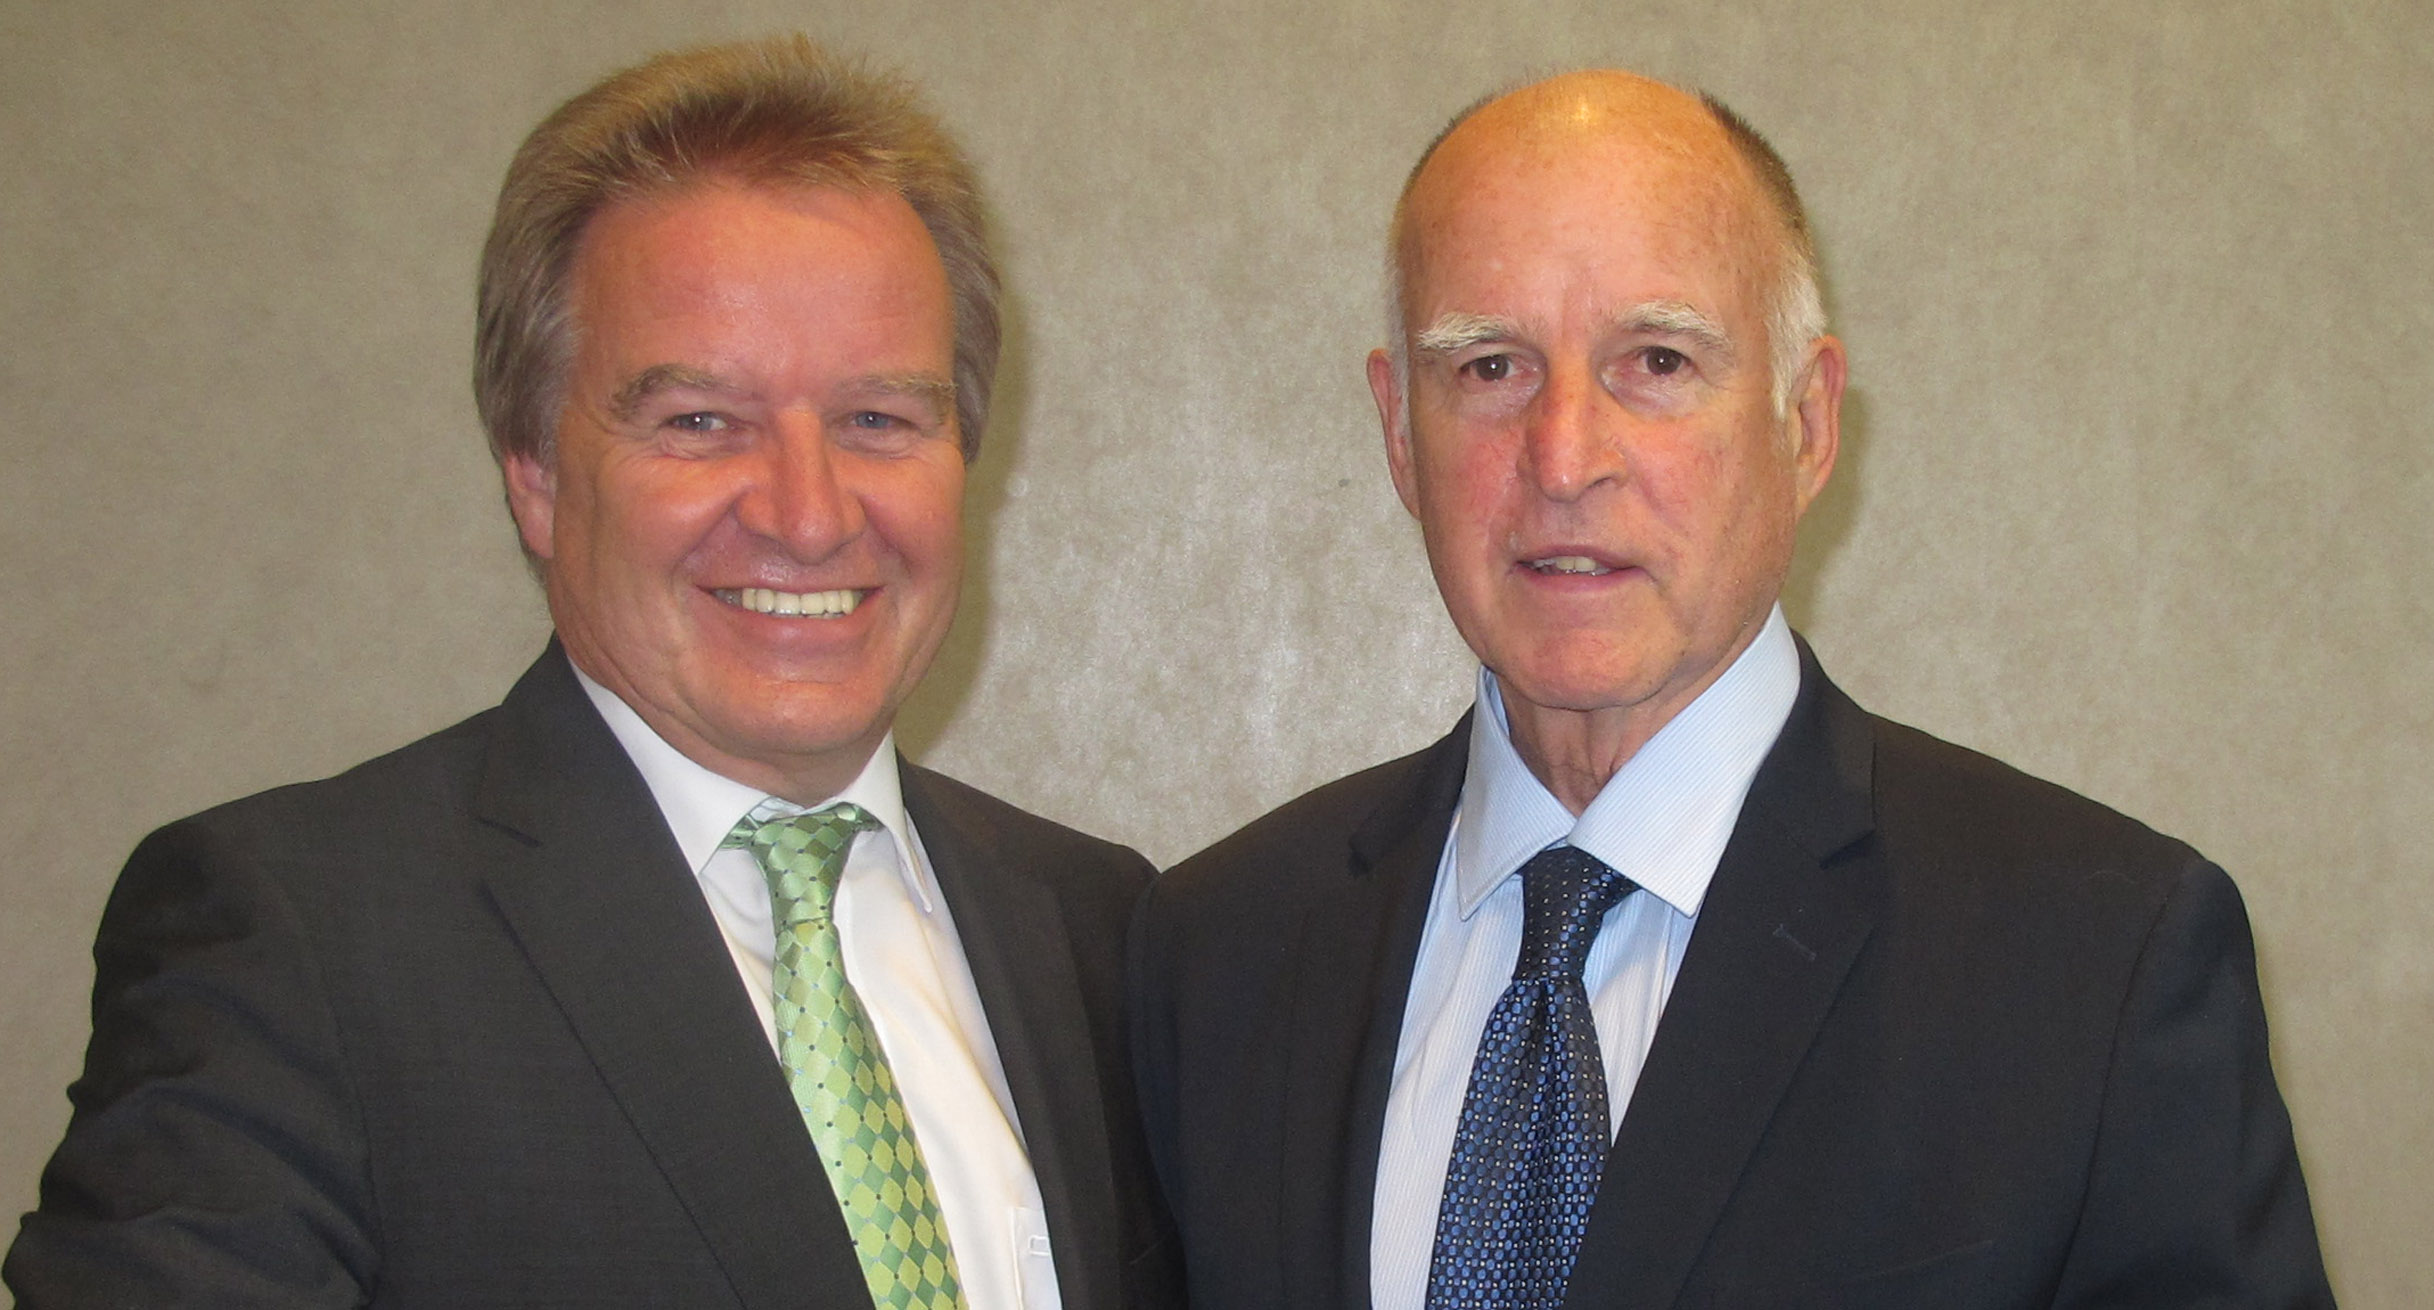 Environment Minister Franz Untersteller (left) and California Governor Jerry Brown']